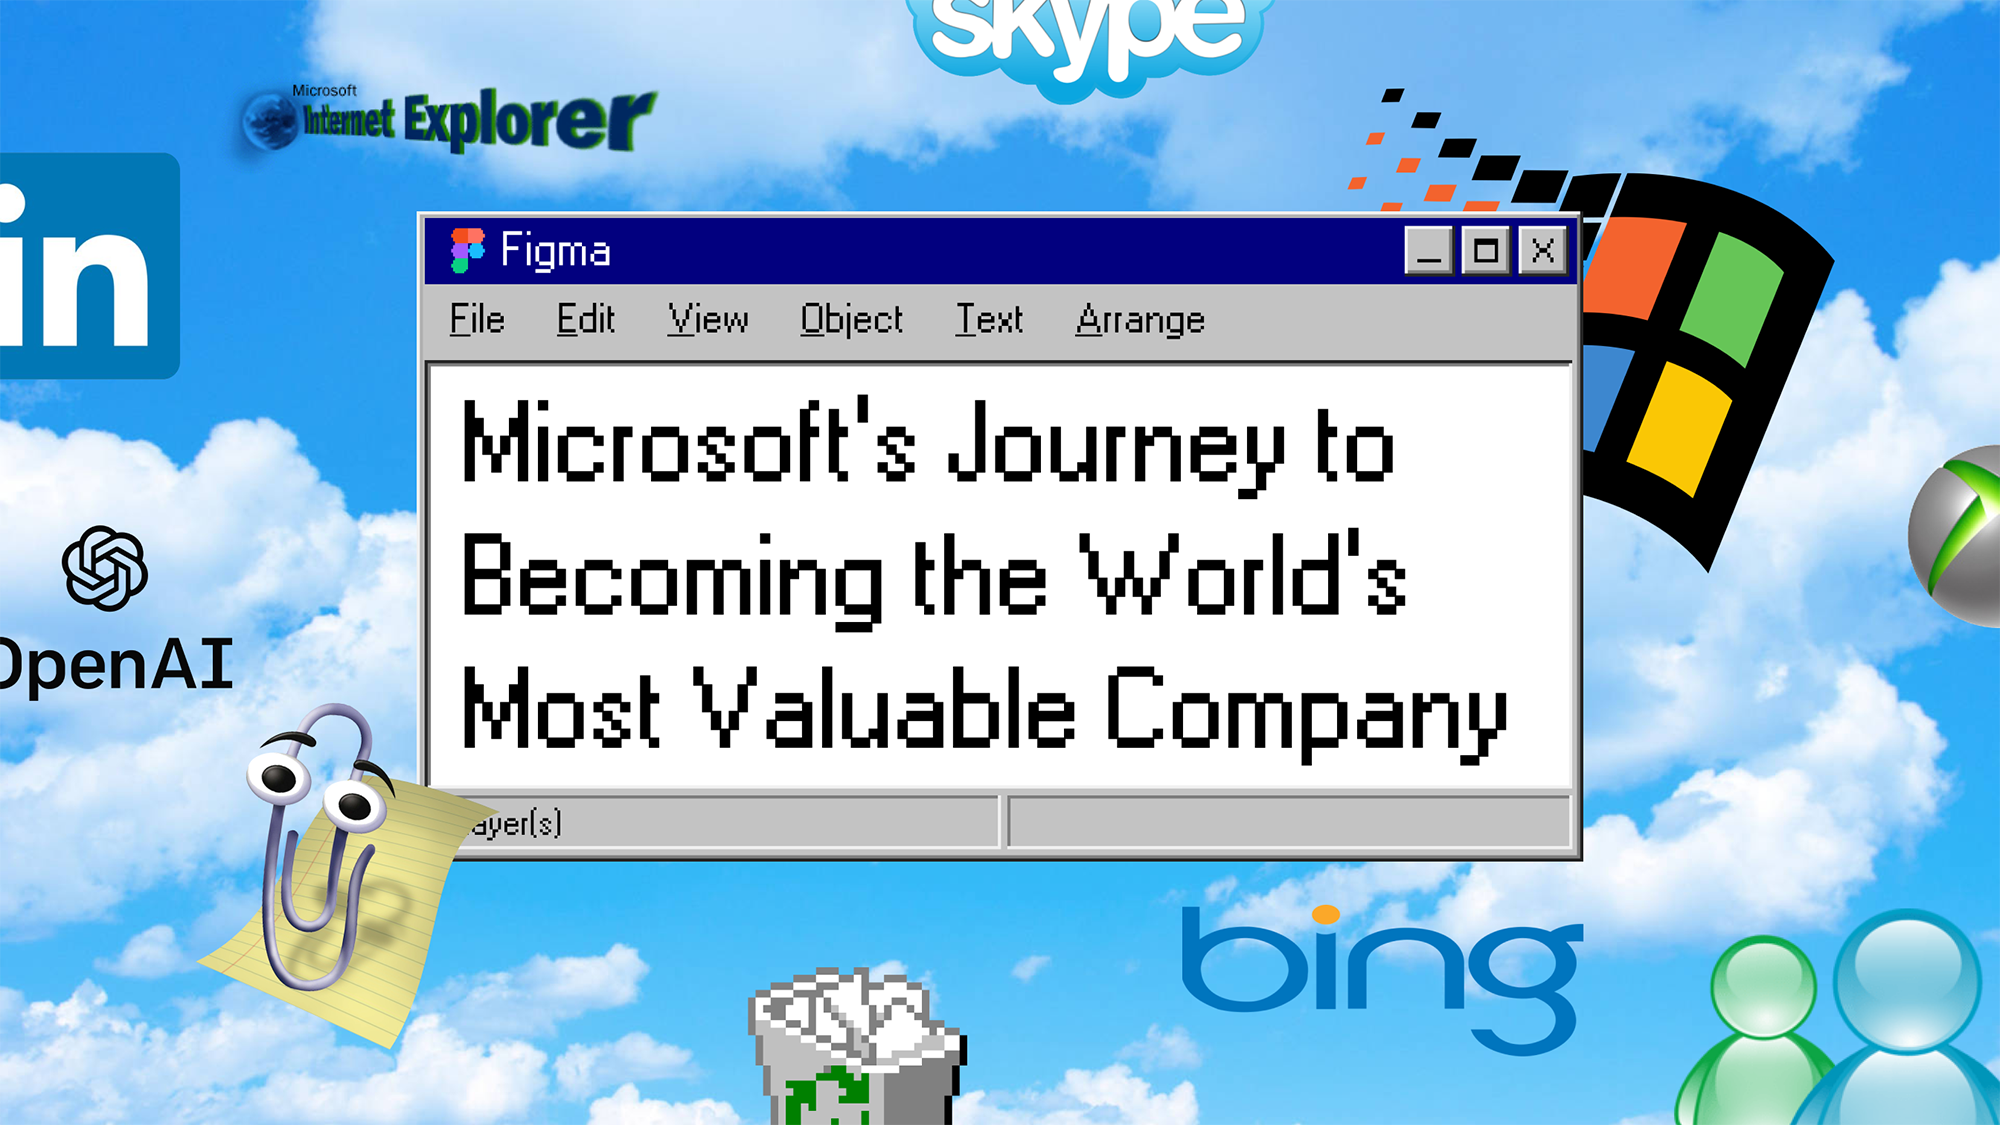 Microsoft's acquisition and growth journey to the top